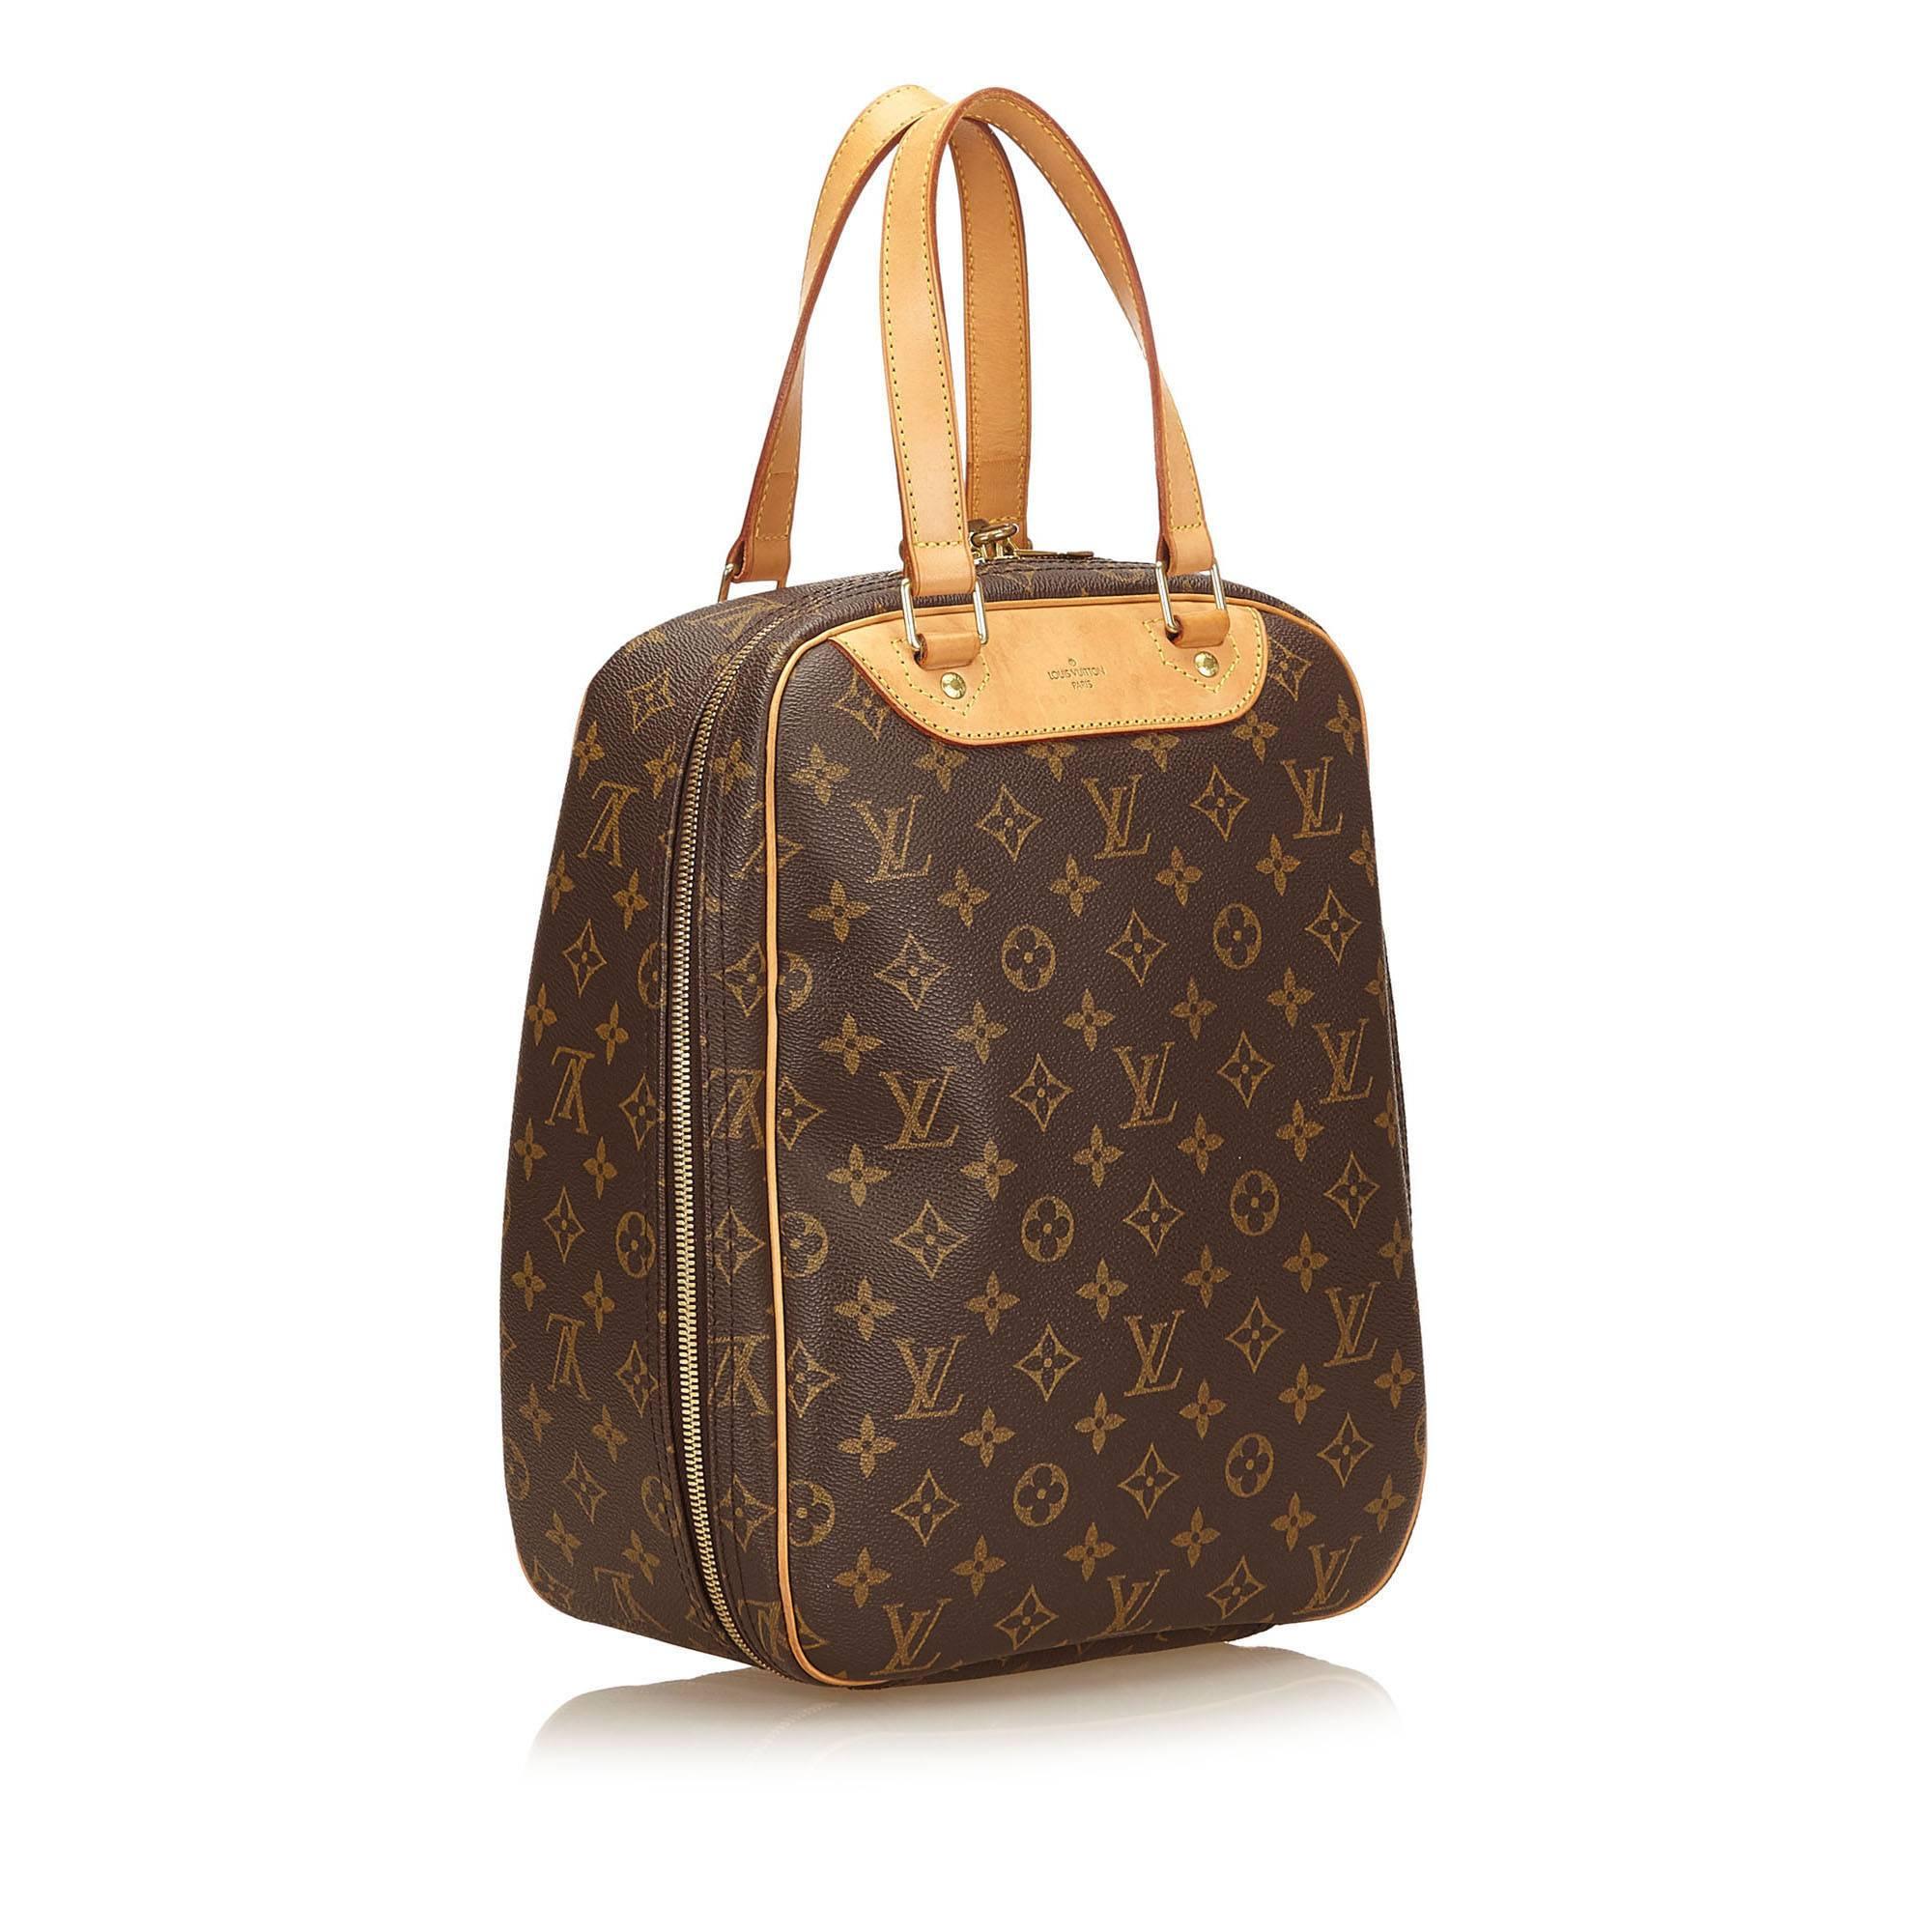 The Excursion features the Monogram canvas, rolled vachetta handles, vachetta trim, a zip around closure, and an interior flat pocket. 

It carries a B condition rating.  

Dimensions: 
Length 24 cm
Width 32 cm
Depth 15 cm
Hand Drop 14